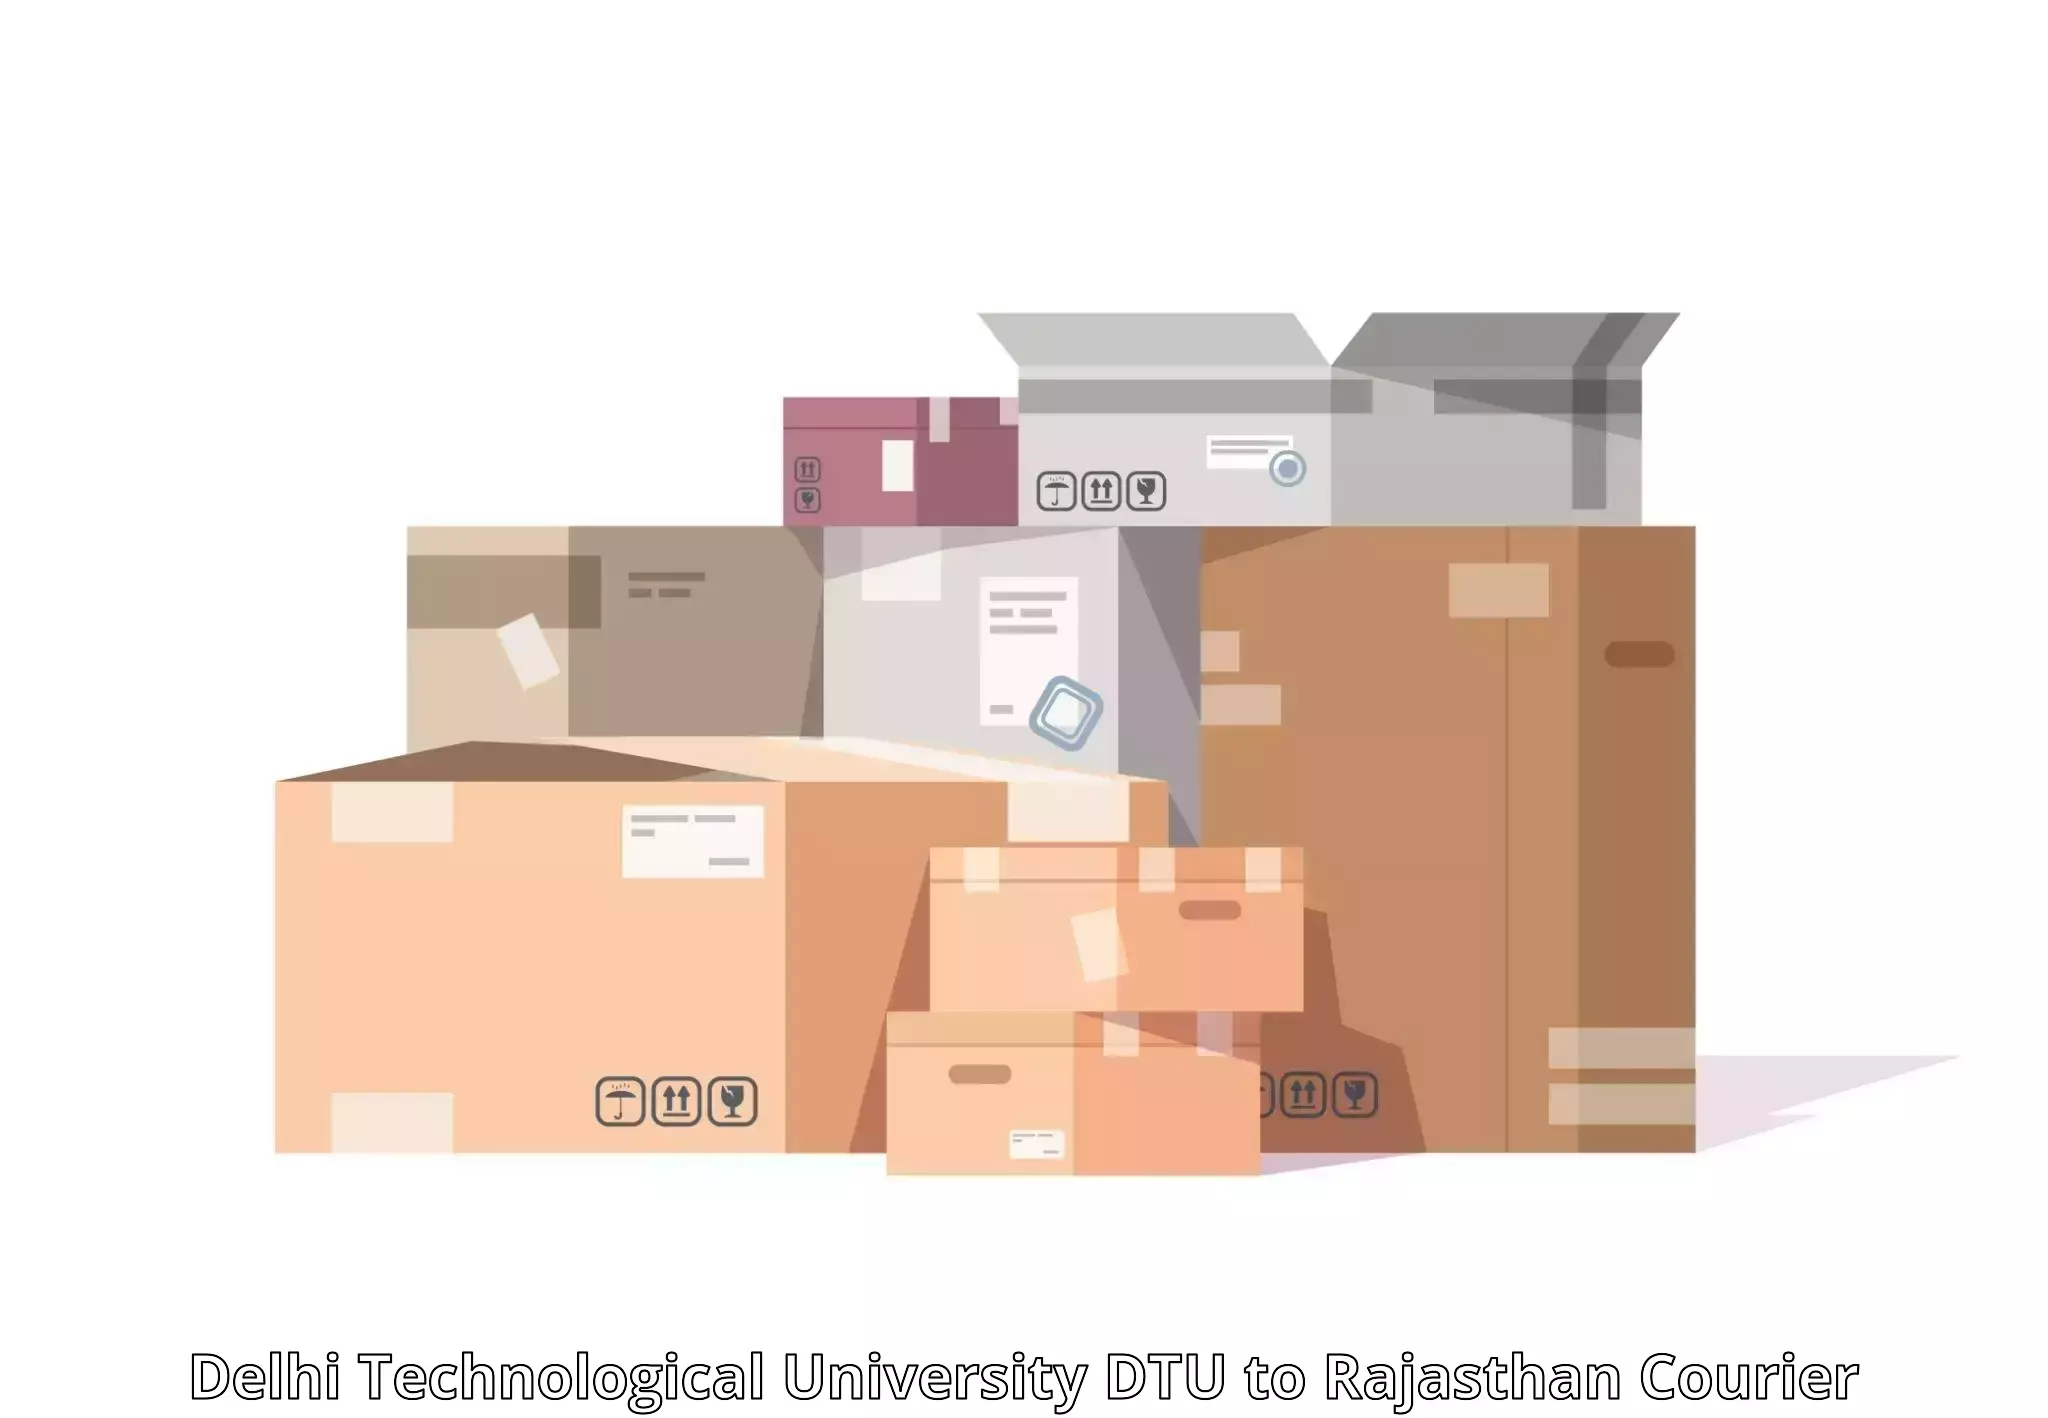 End-to-end delivery Delhi Technological University DTU to Yeswanthapur